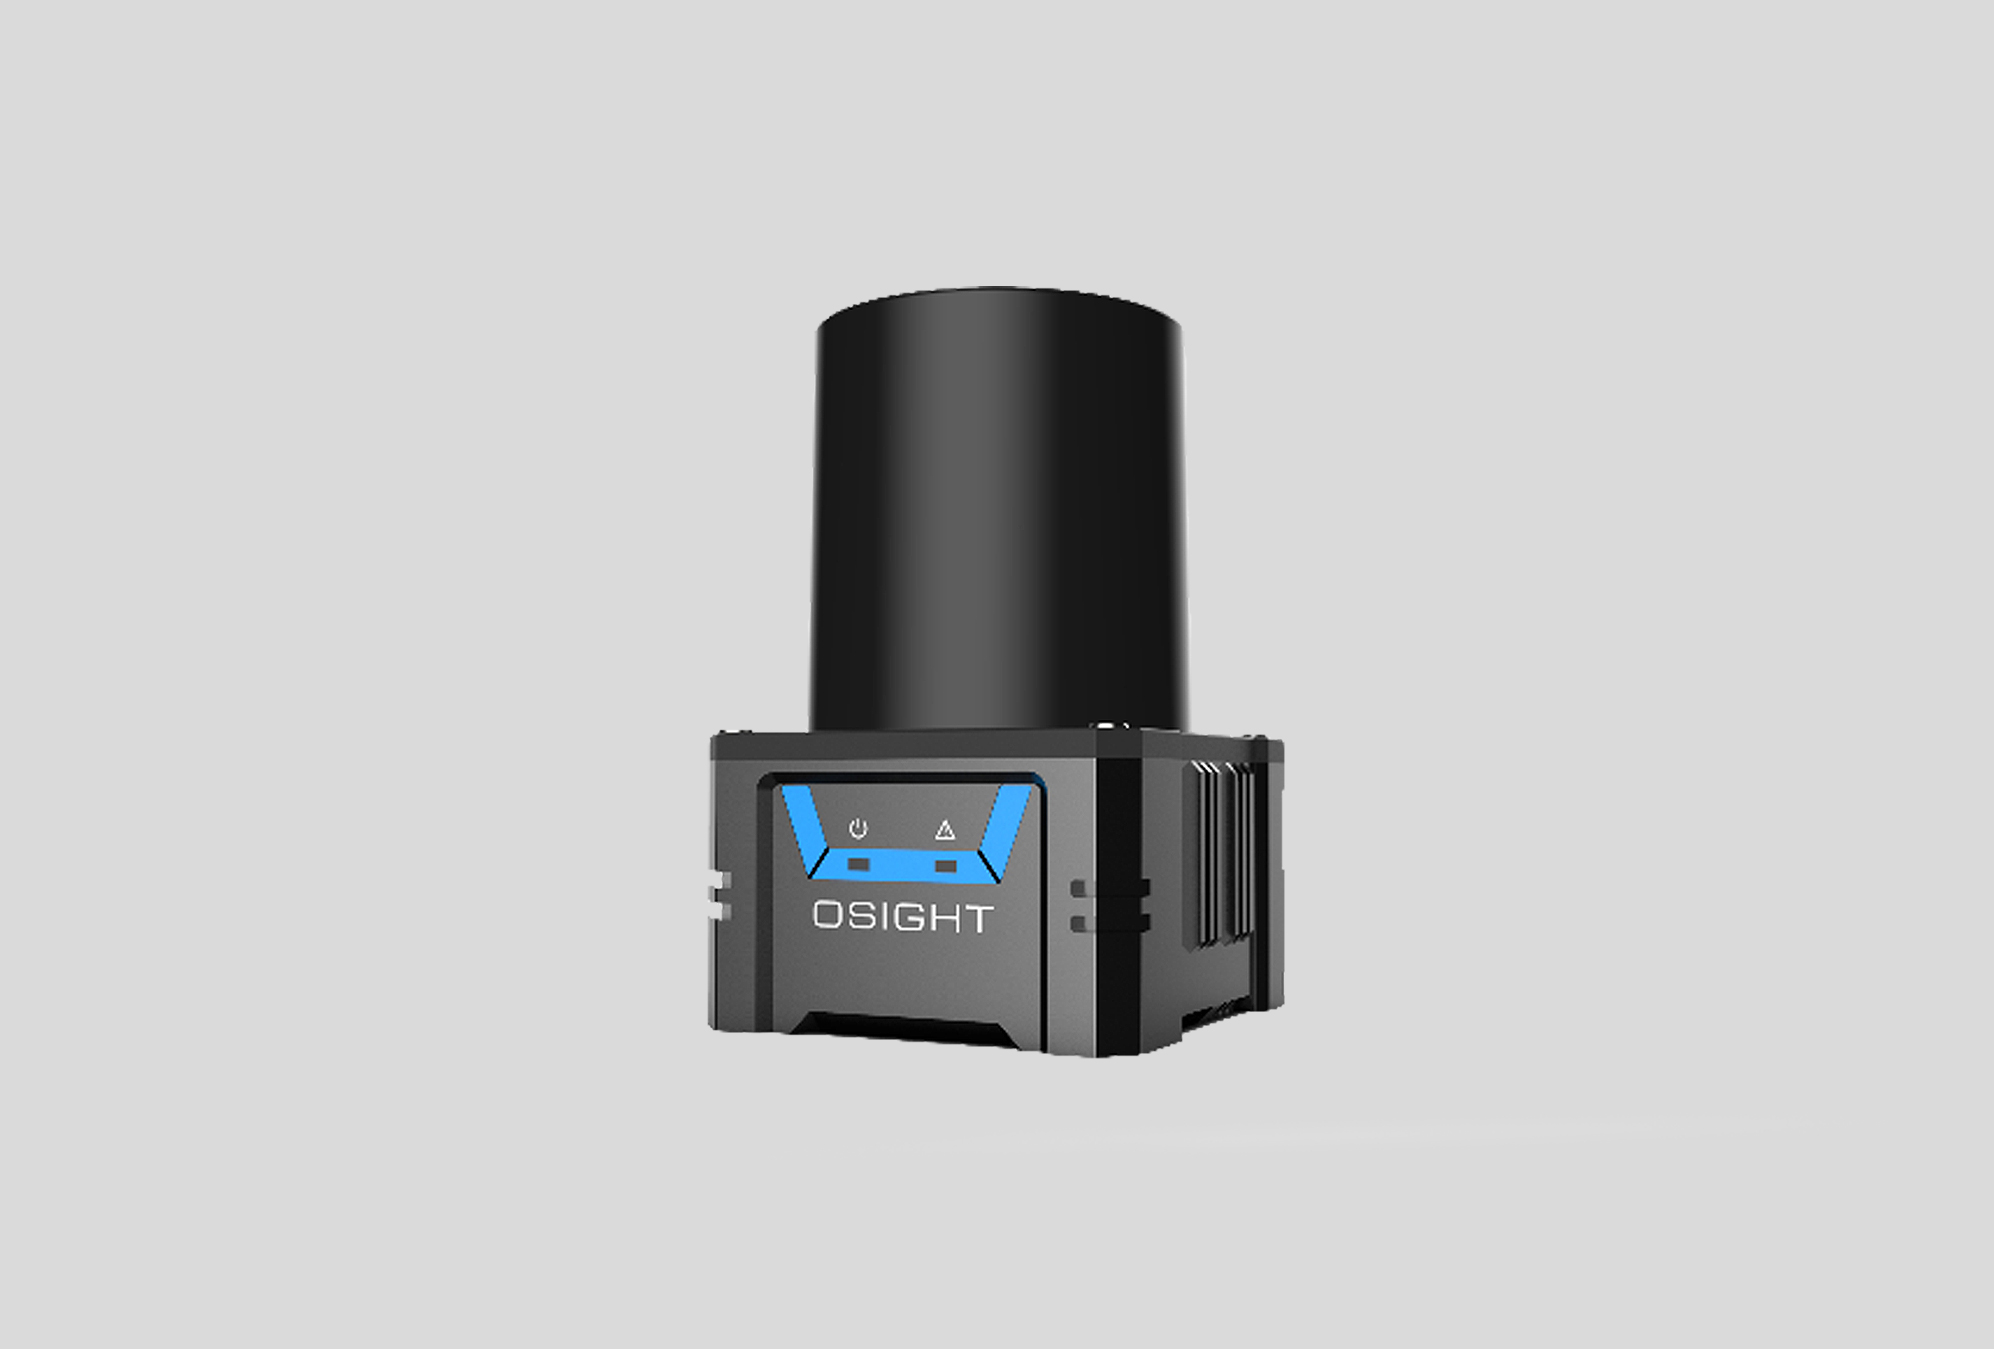 New product launch - Osight HE101 helps precise vehicle separation detection